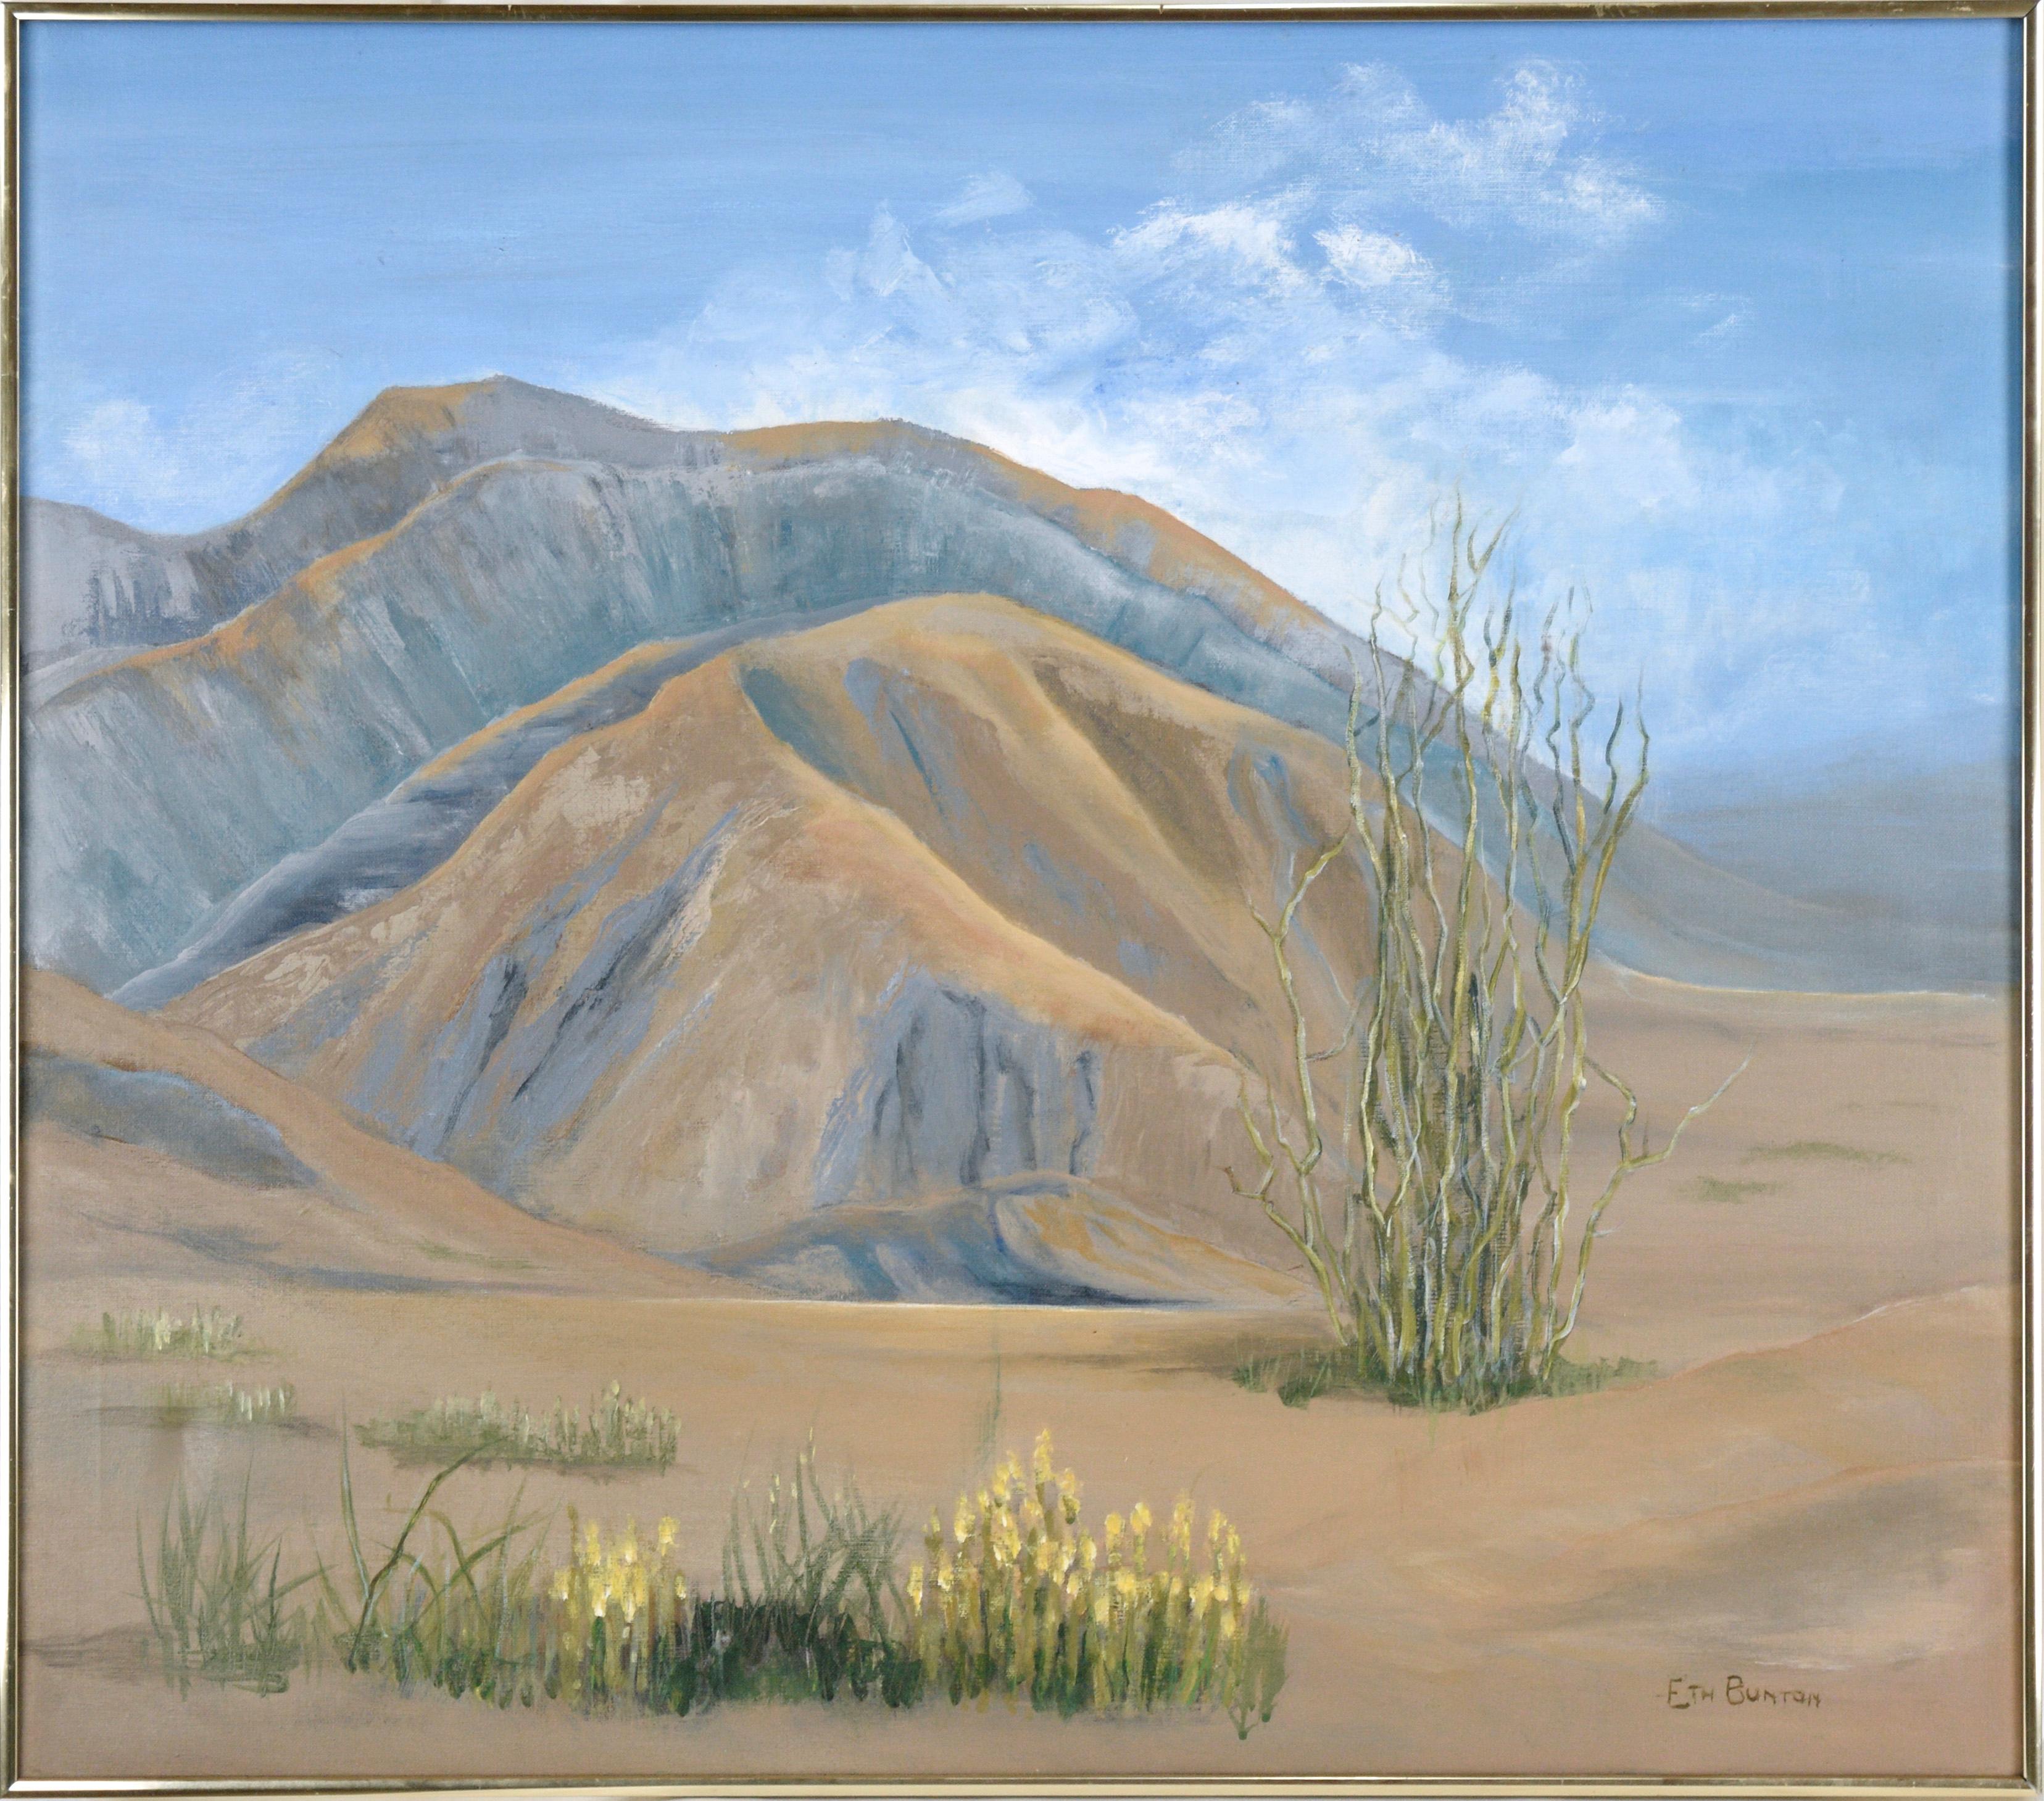 Desert Foothills Under a Blue Sky - Landscape in Acrylic on Canvas